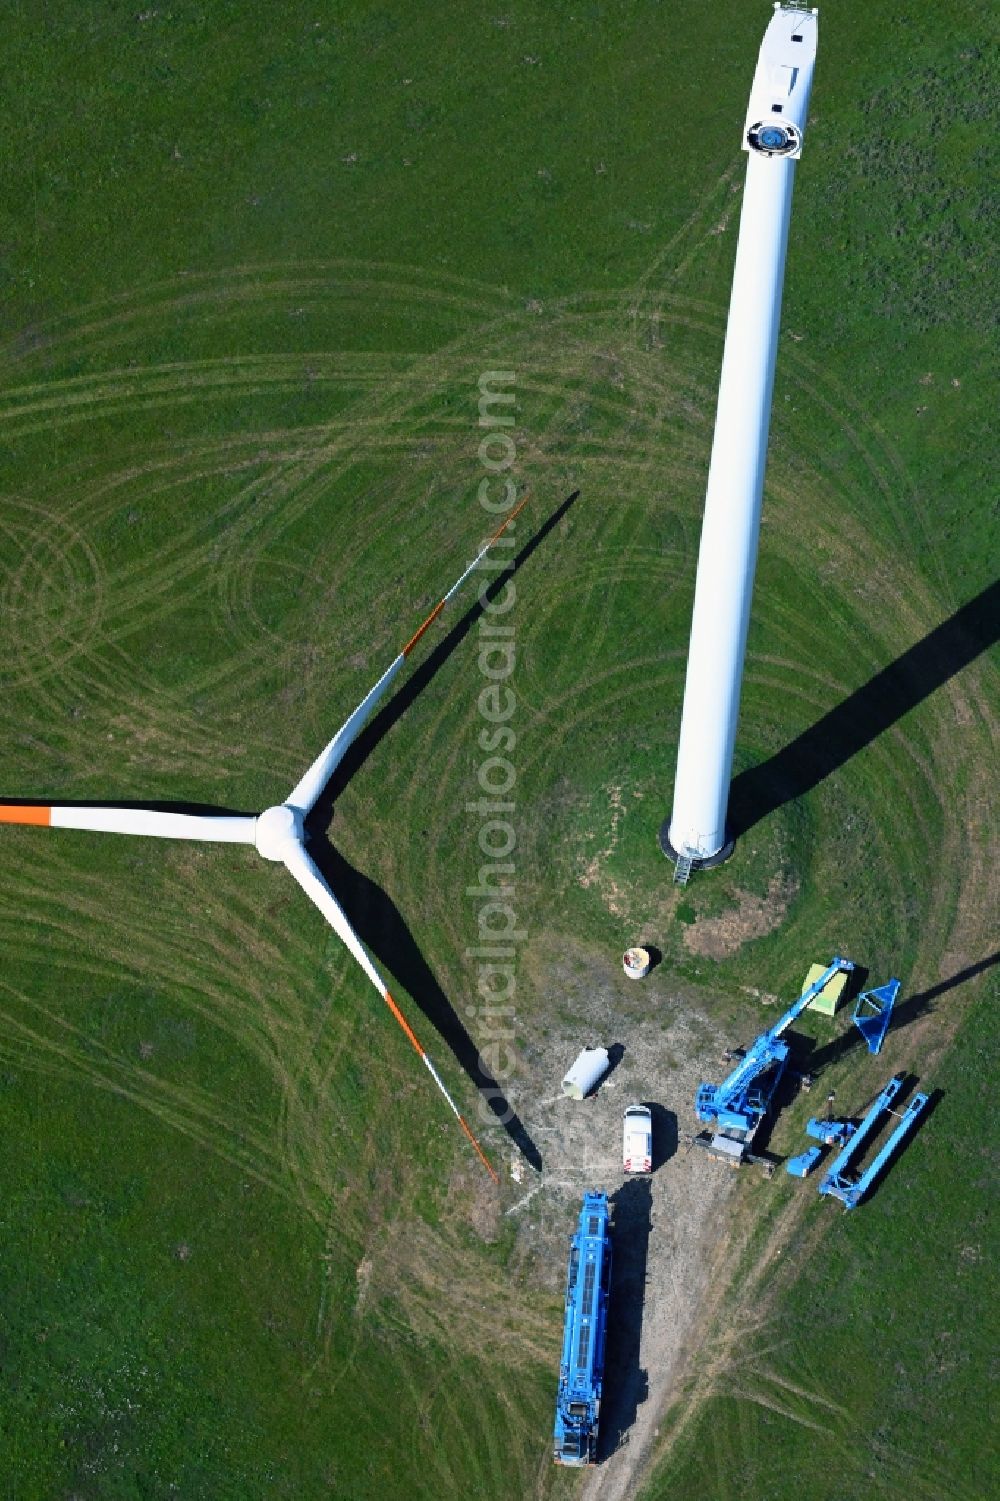 Kemberg from the bird's eye view: Construction site for wind turbine installation on a field in Kemberg in the state Saxony-Anhalt, Germany